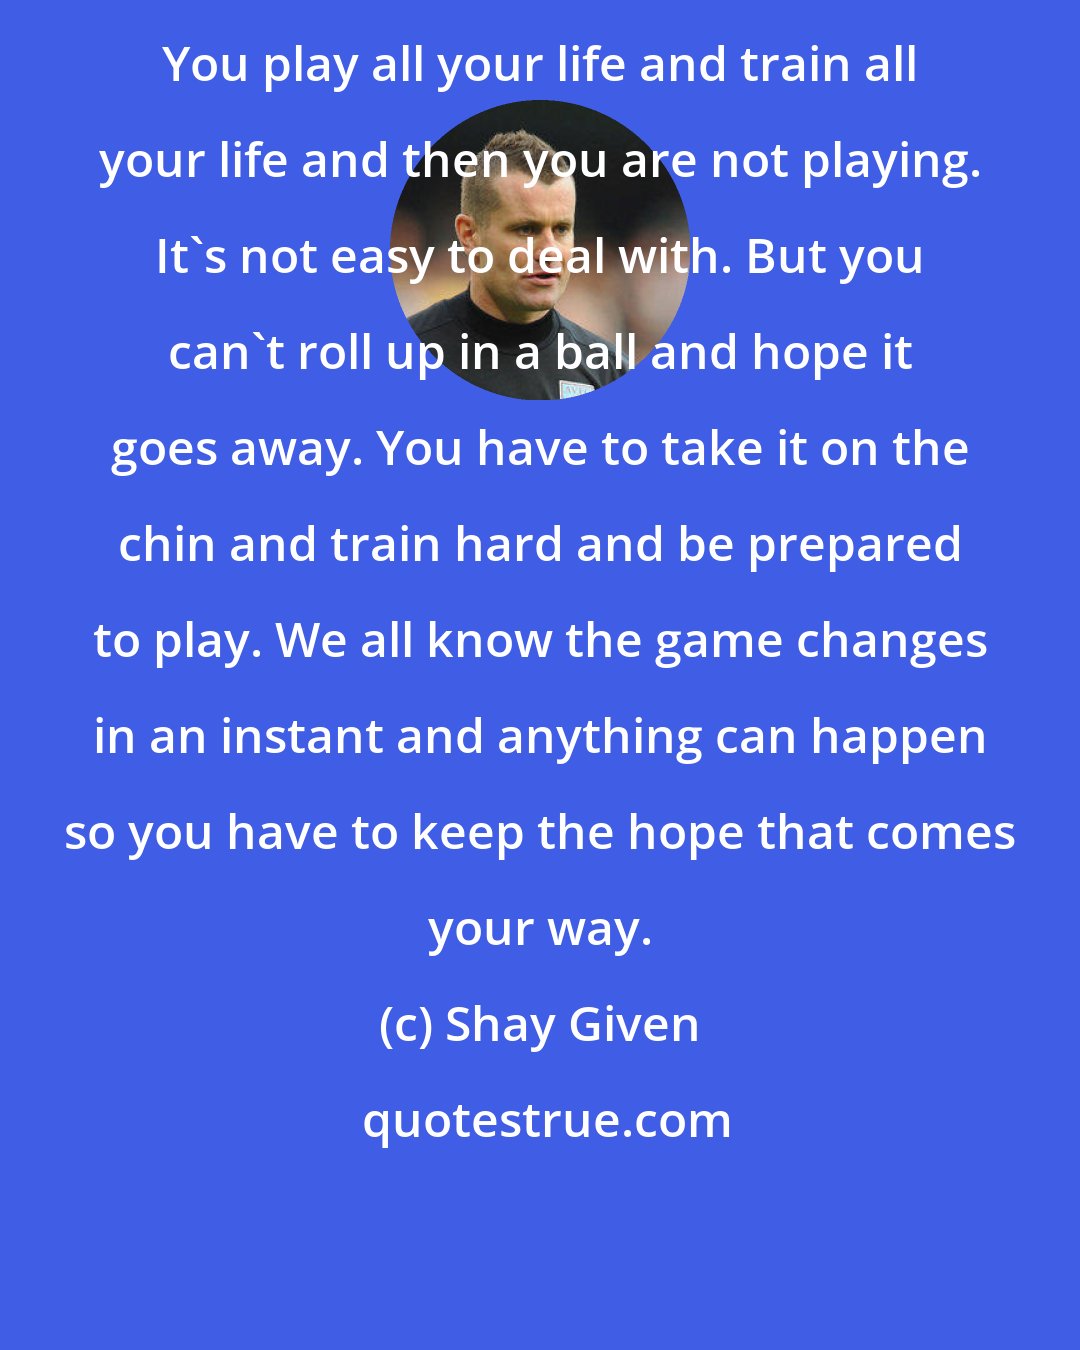 Shay Given: You play all your life and train all your life and then you are not playing. It's not easy to deal with. But you can't roll up in a ball and hope it goes away. You have to take it on the chin and train hard and be prepared to play. We all know the game changes in an instant and anything can happen so you have to keep the hope that comes your way.